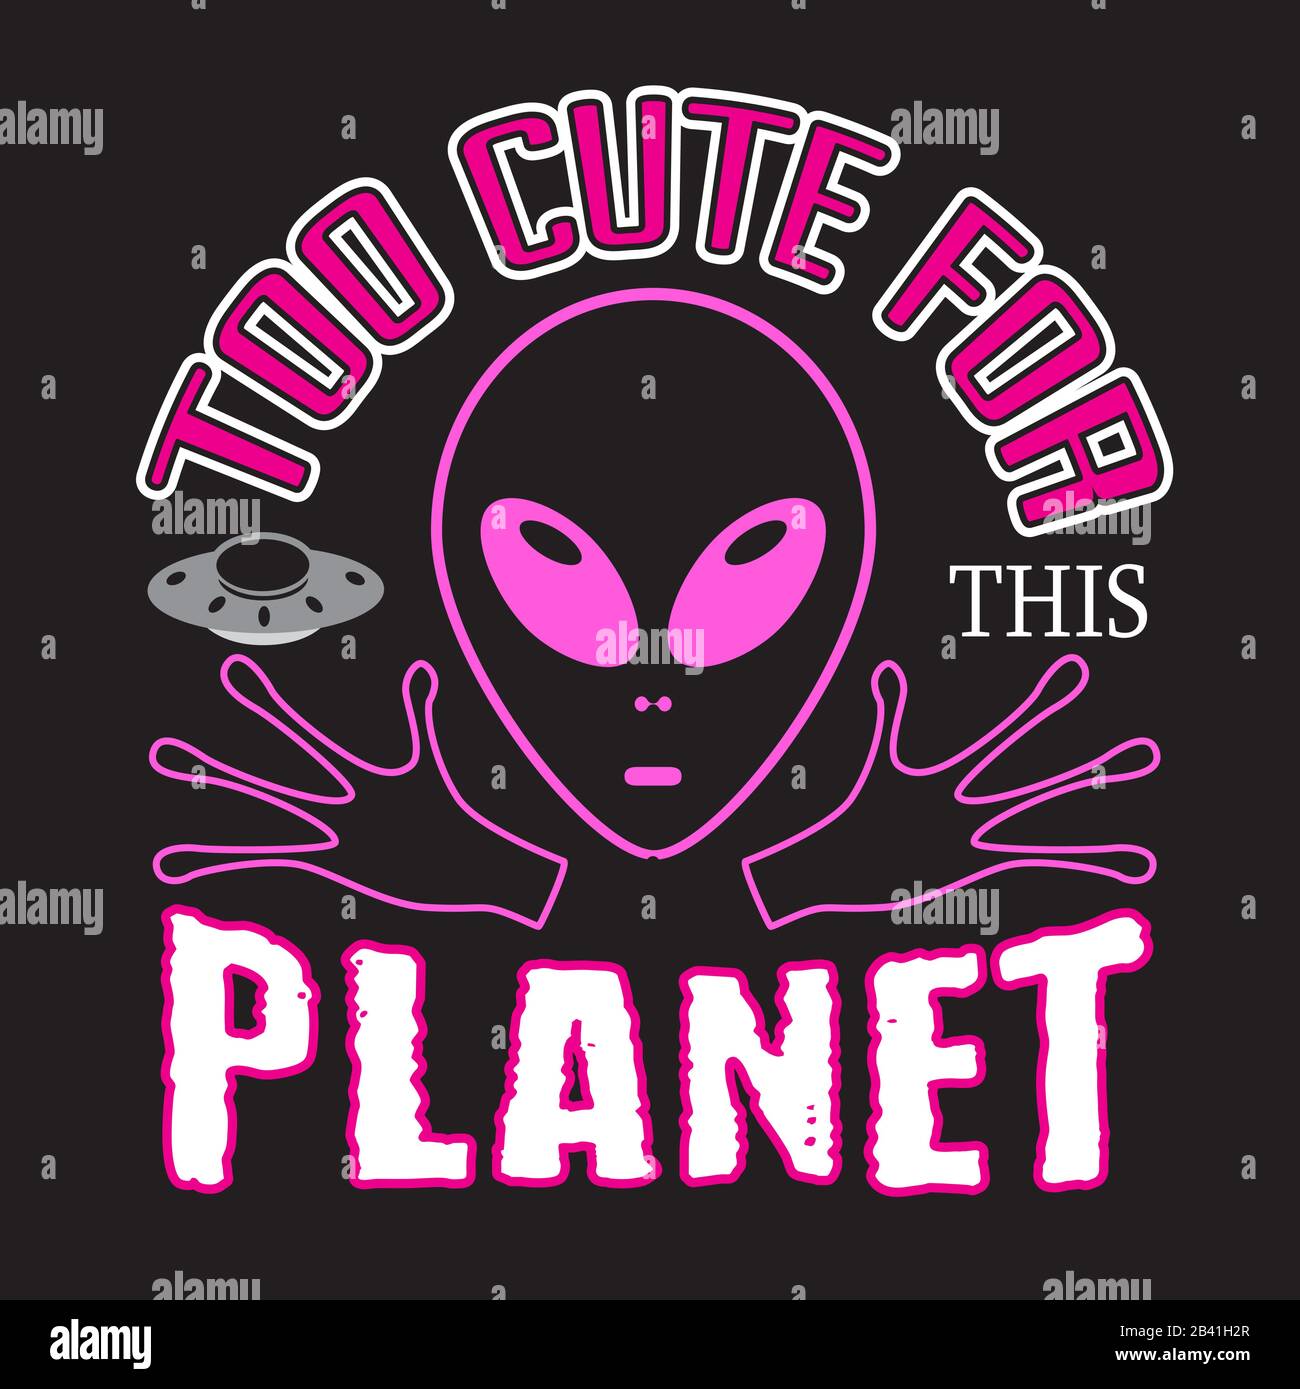 Aliens Quotes and Slogan good for Tee. Too Cute for This Planet ...